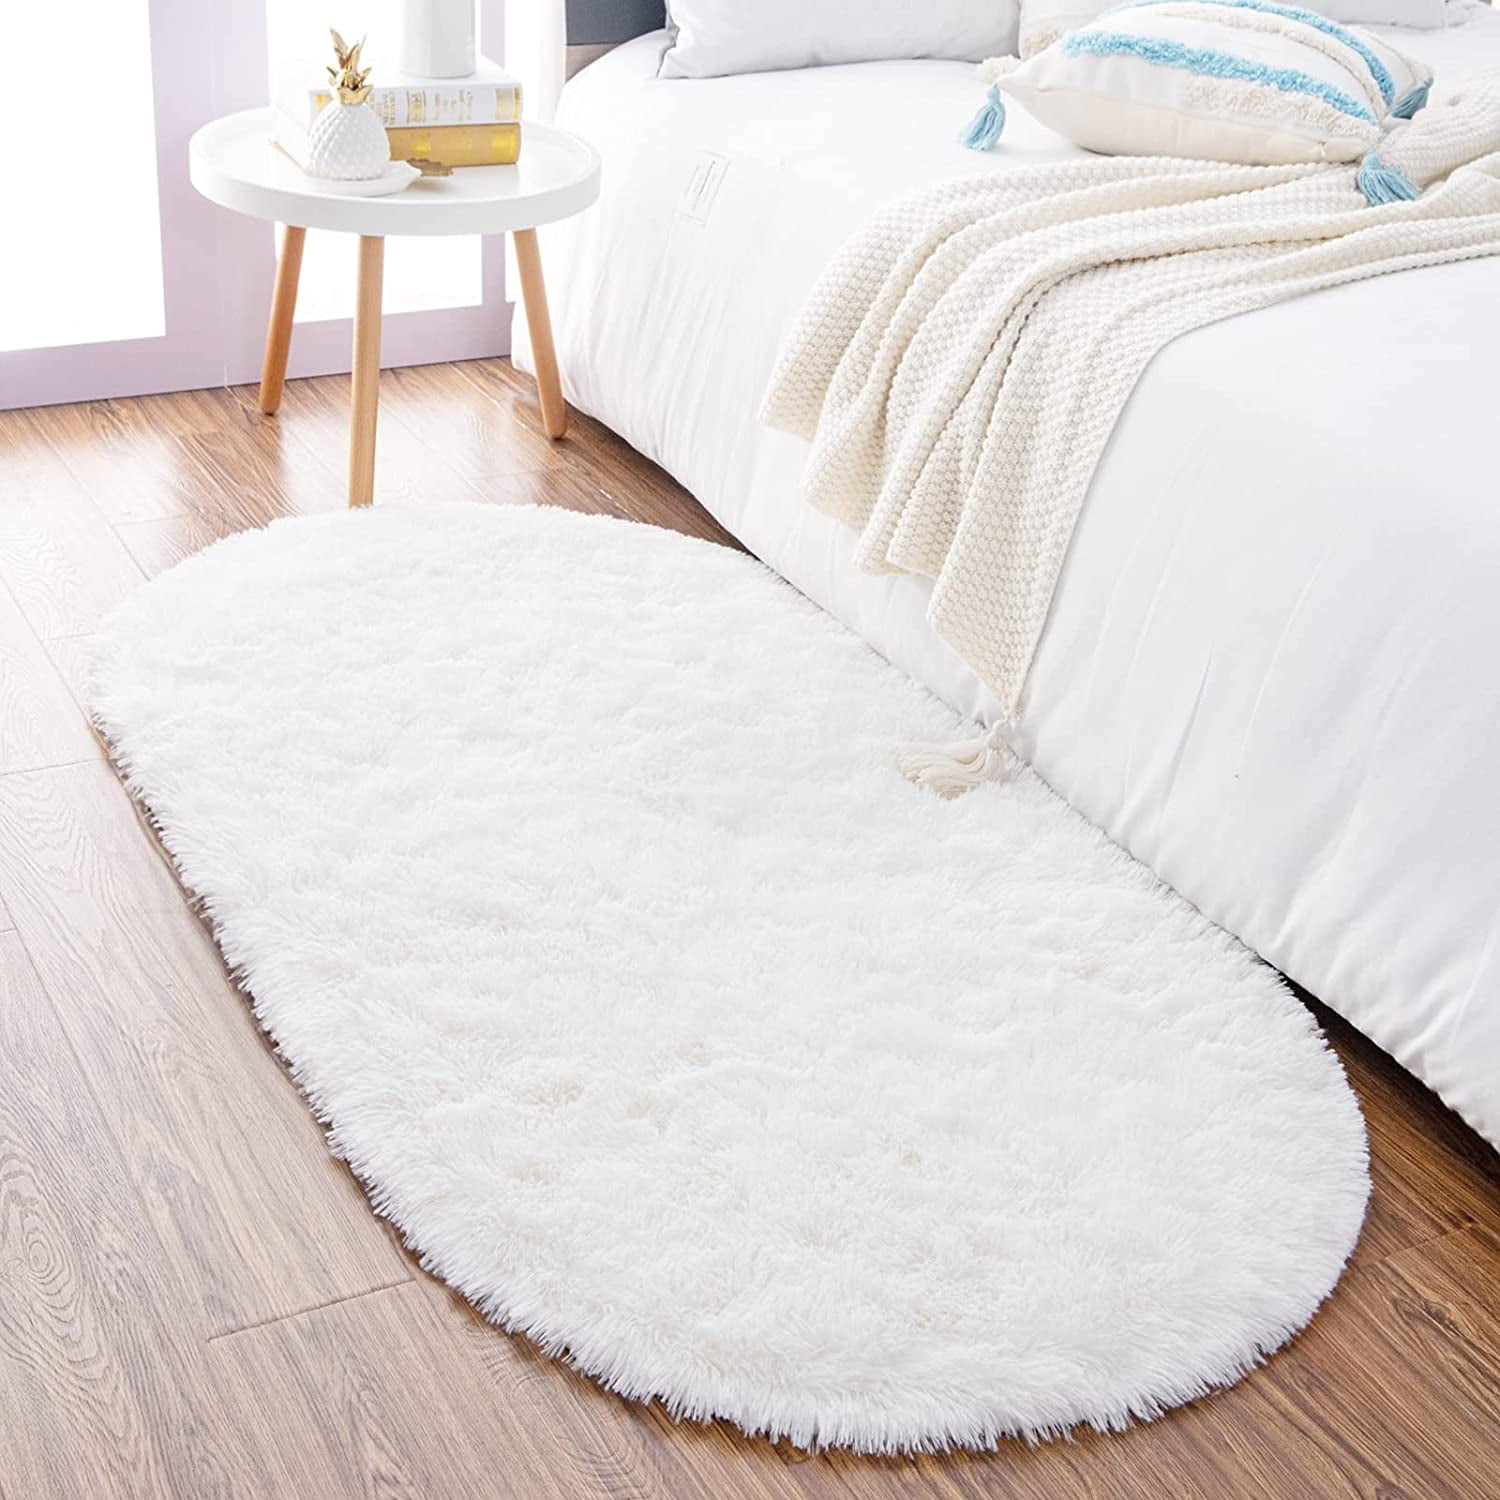 Homore Ultra Soft Modern Oval Rugs for Bedroom, 2.6' x 5.3' , Creamy 